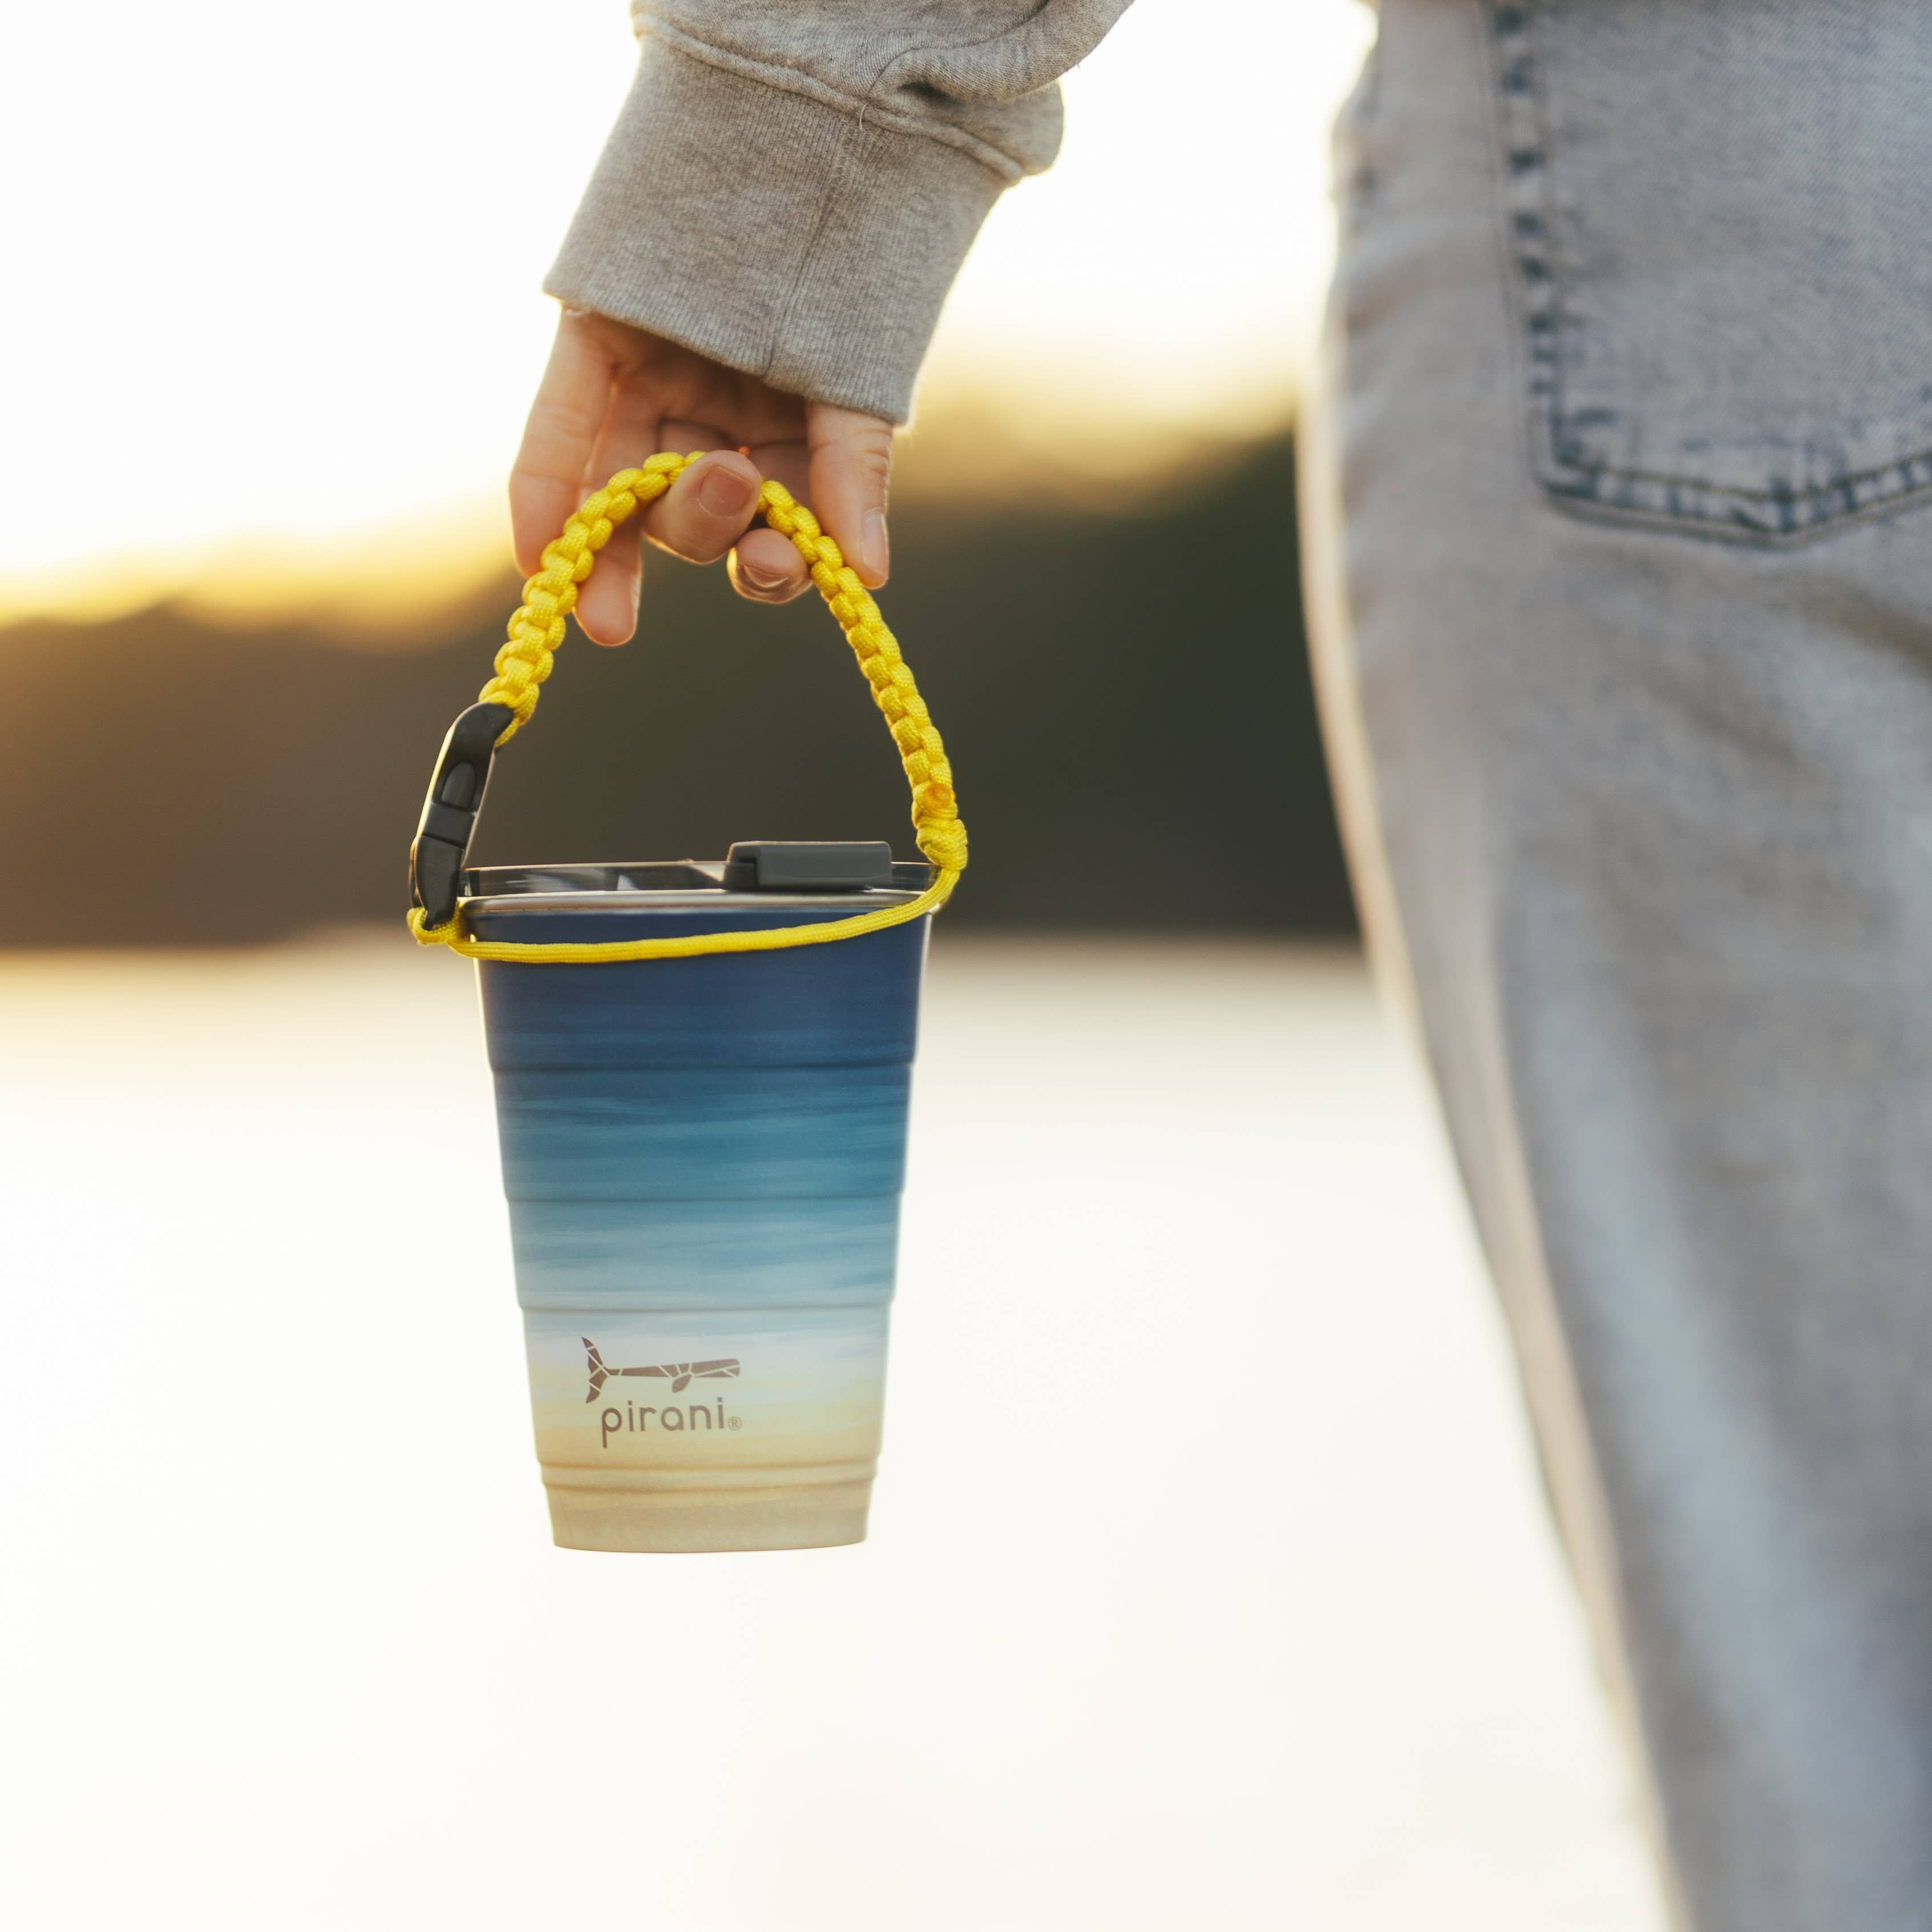 Pirani aims to reduce single-use plastic waste with insulated cups